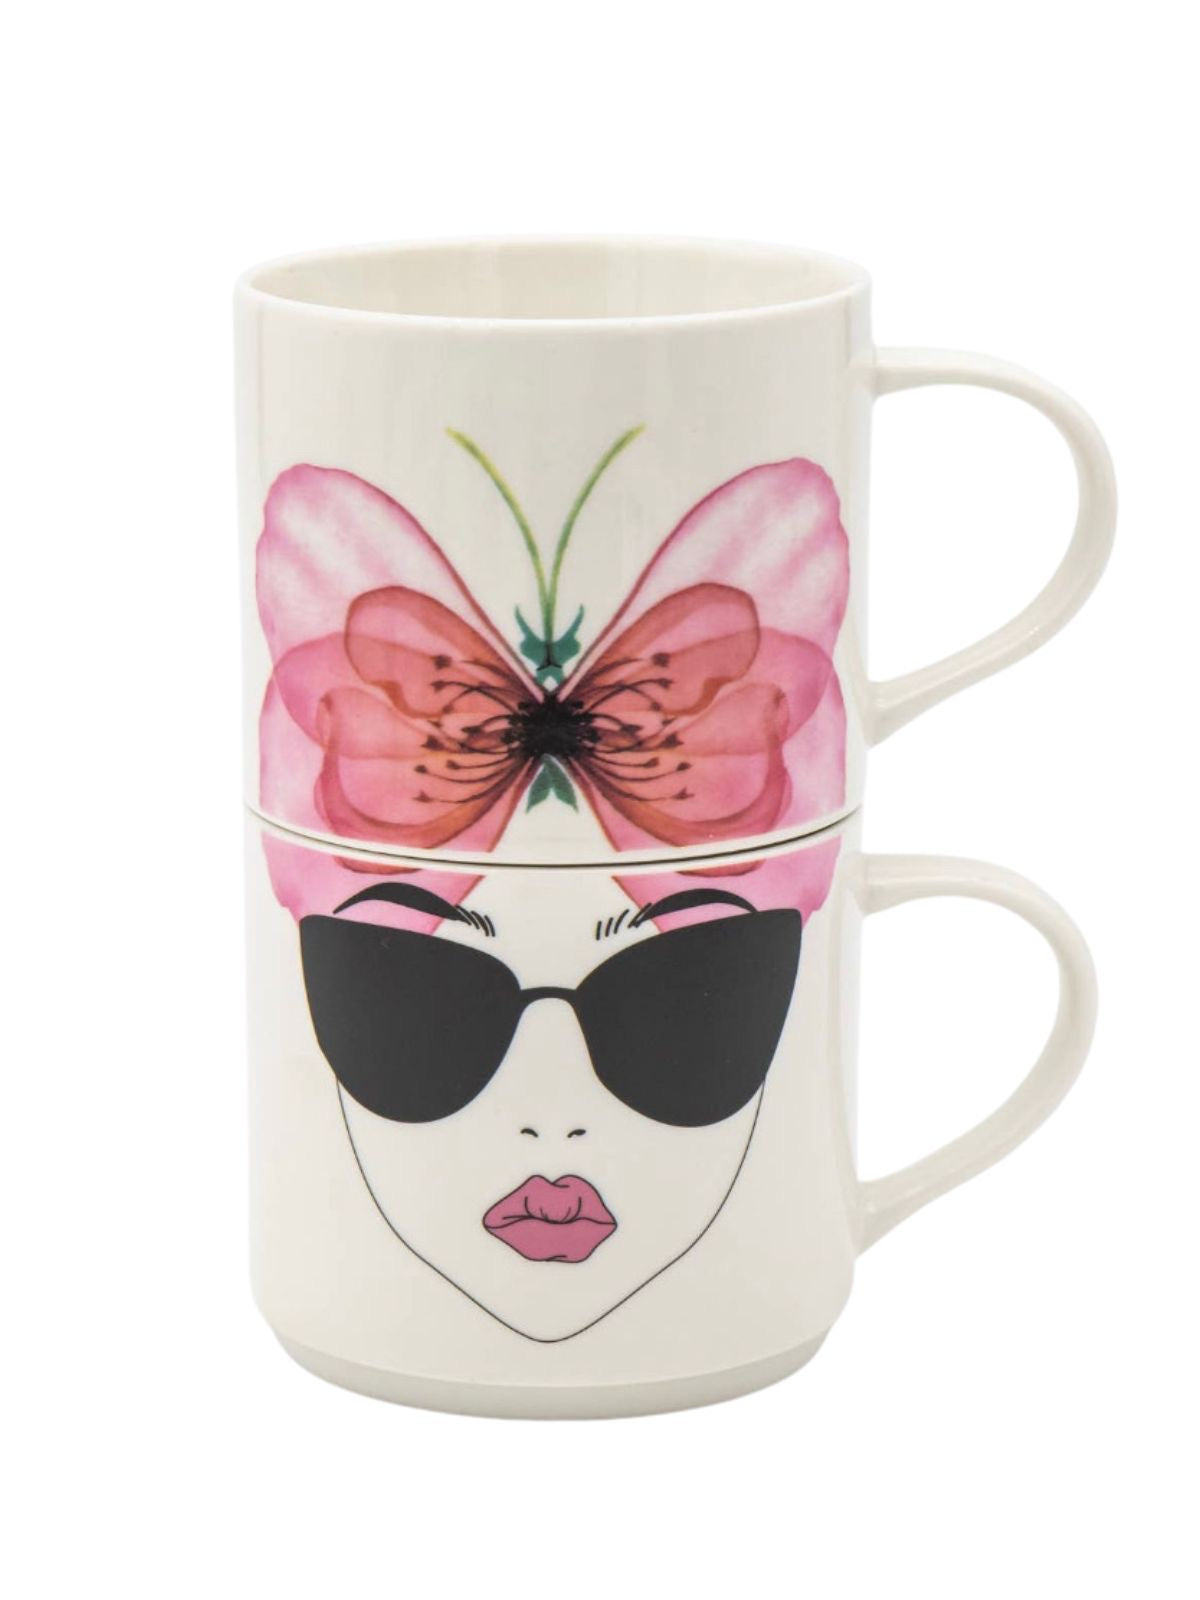 This design features a pink butterfly on the top mug, and a stylish portrait of a woman on the other!